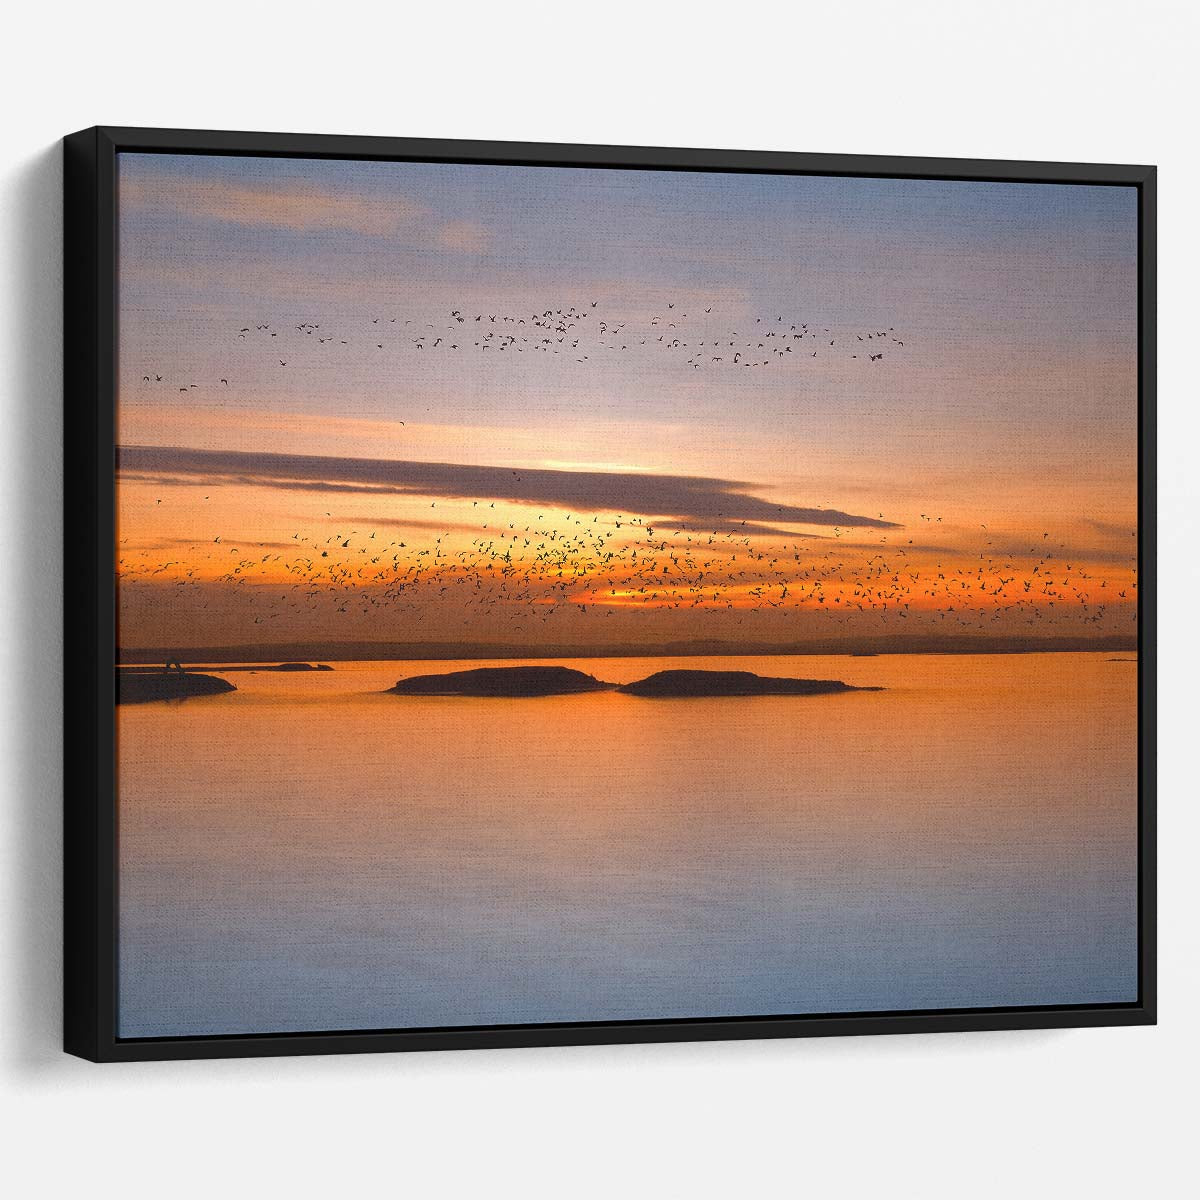 Twilight Birds Migration Over Mietkow Lake Wall Art by Luxuriance Designs. Made in USA.